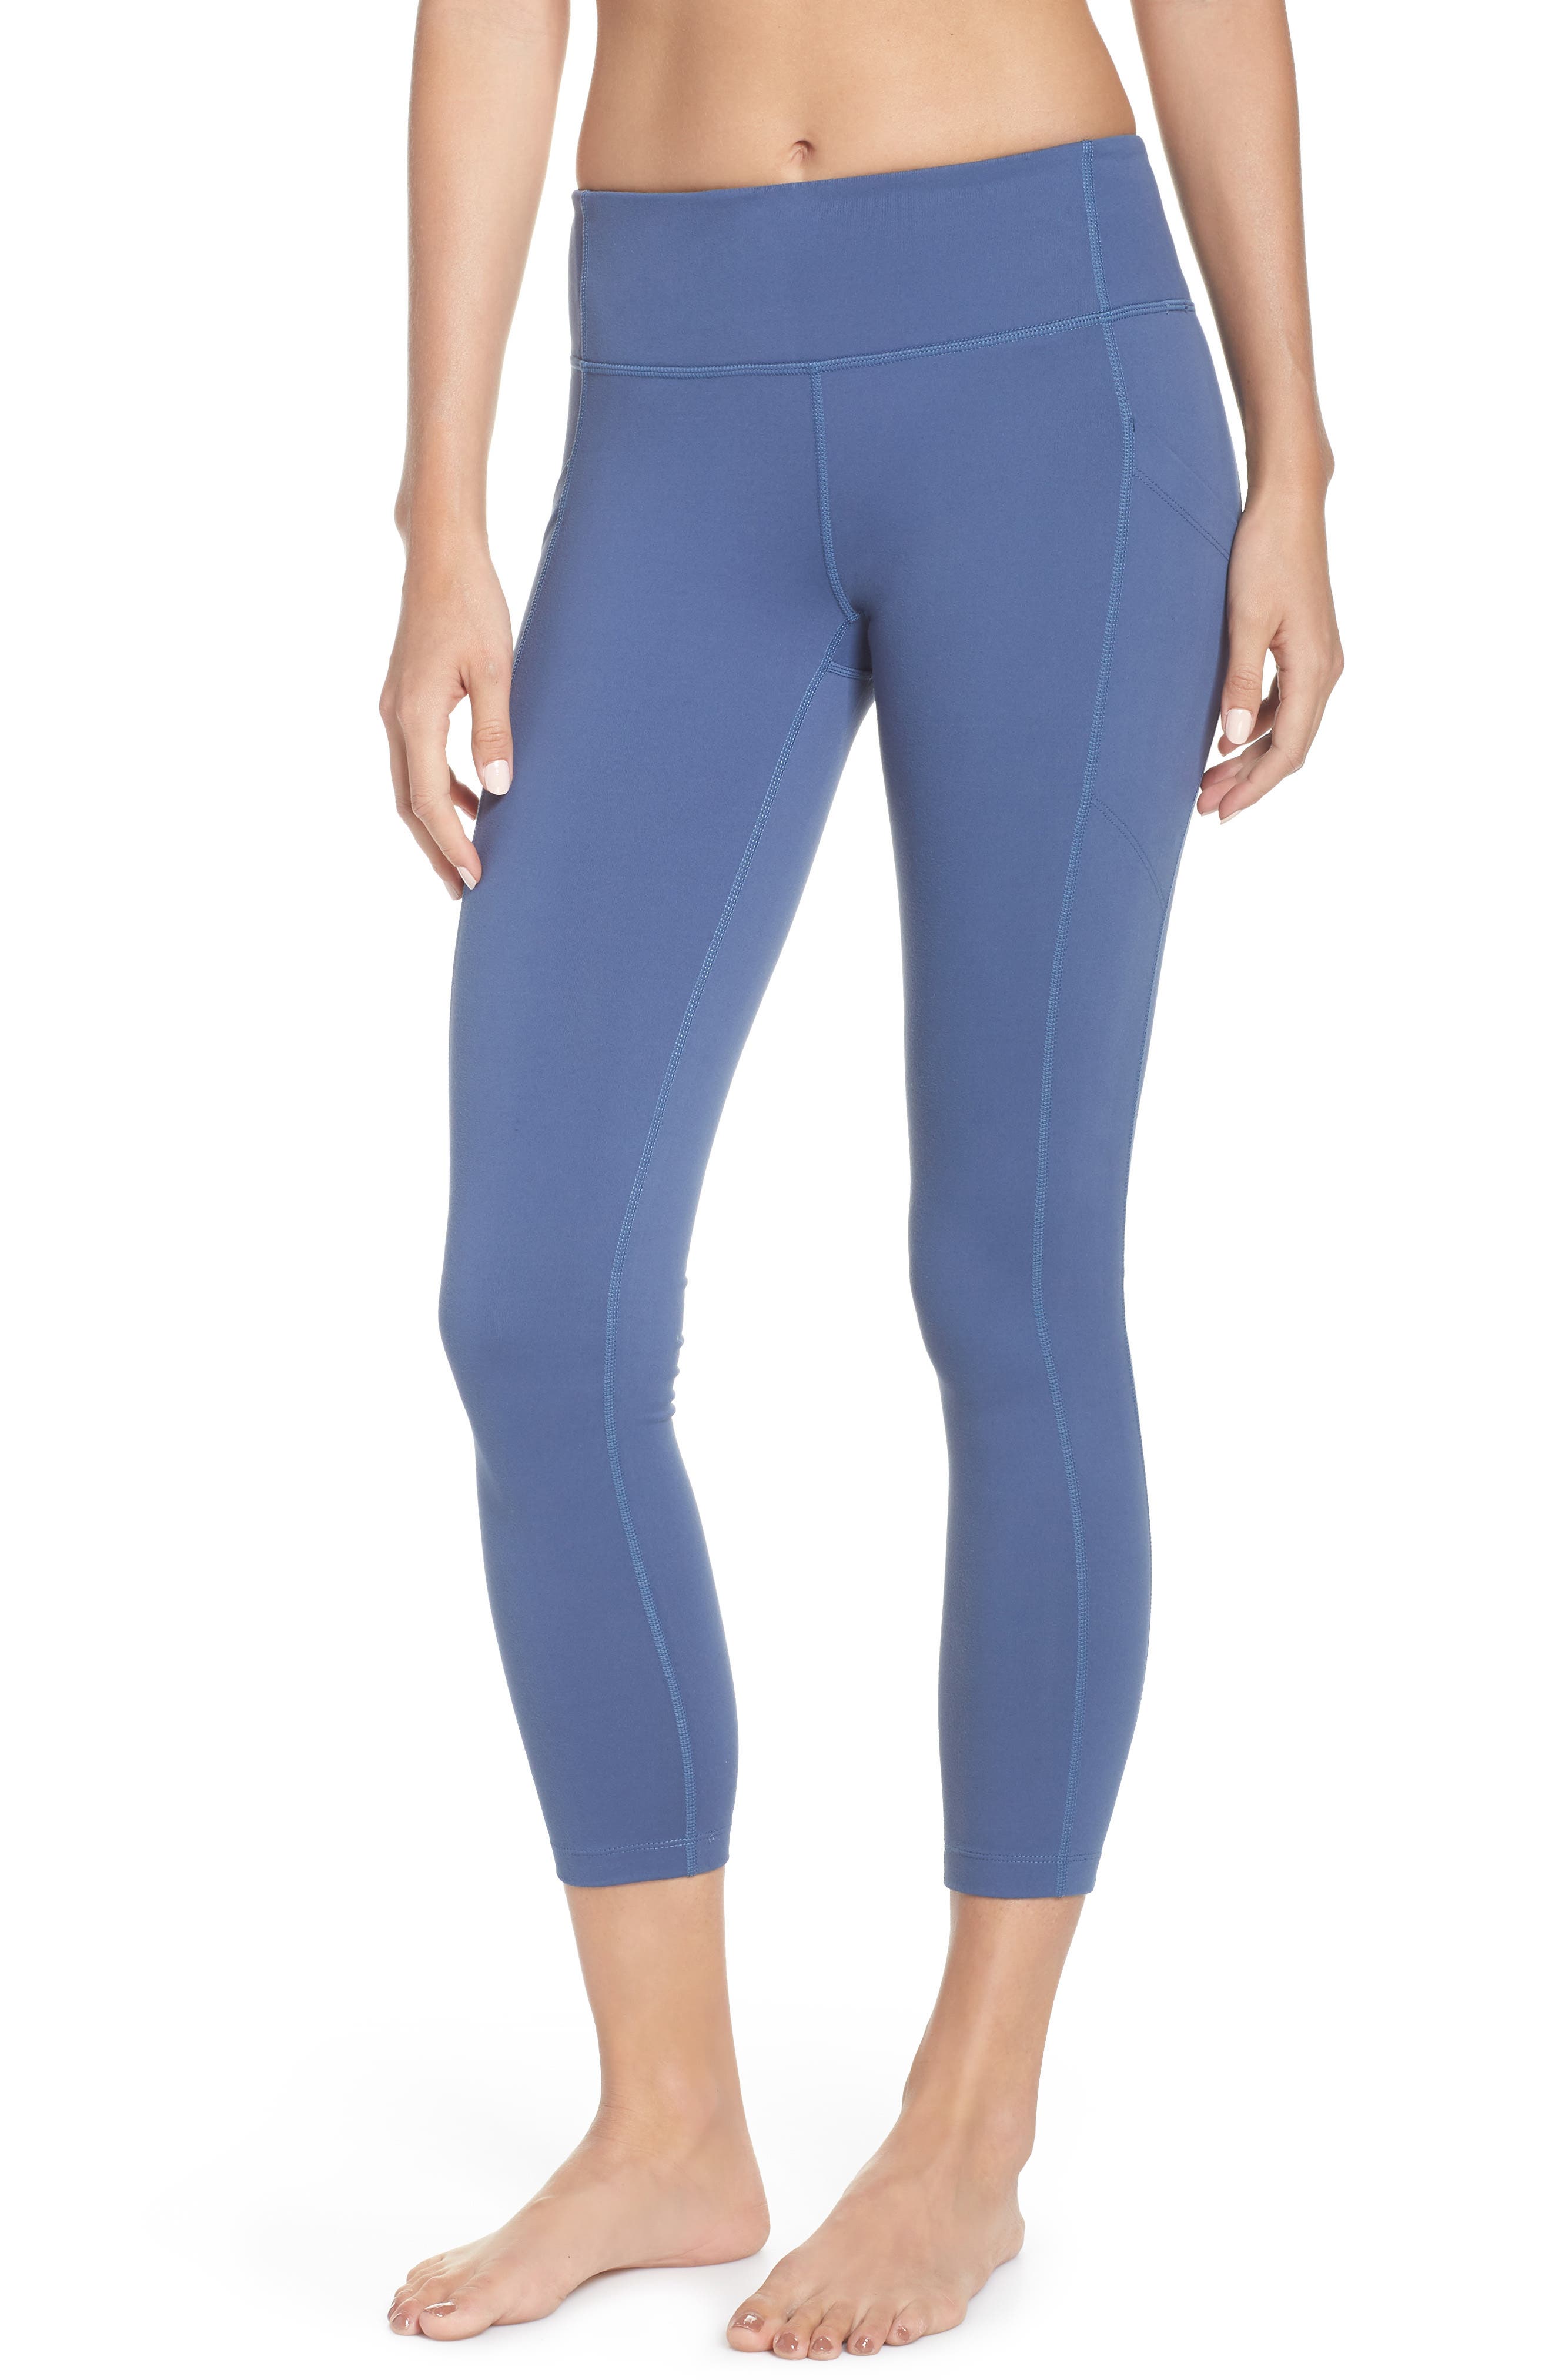 Top-rated Zella leggings are 40% off at Nordstrom right now: 'Best leggings  ever